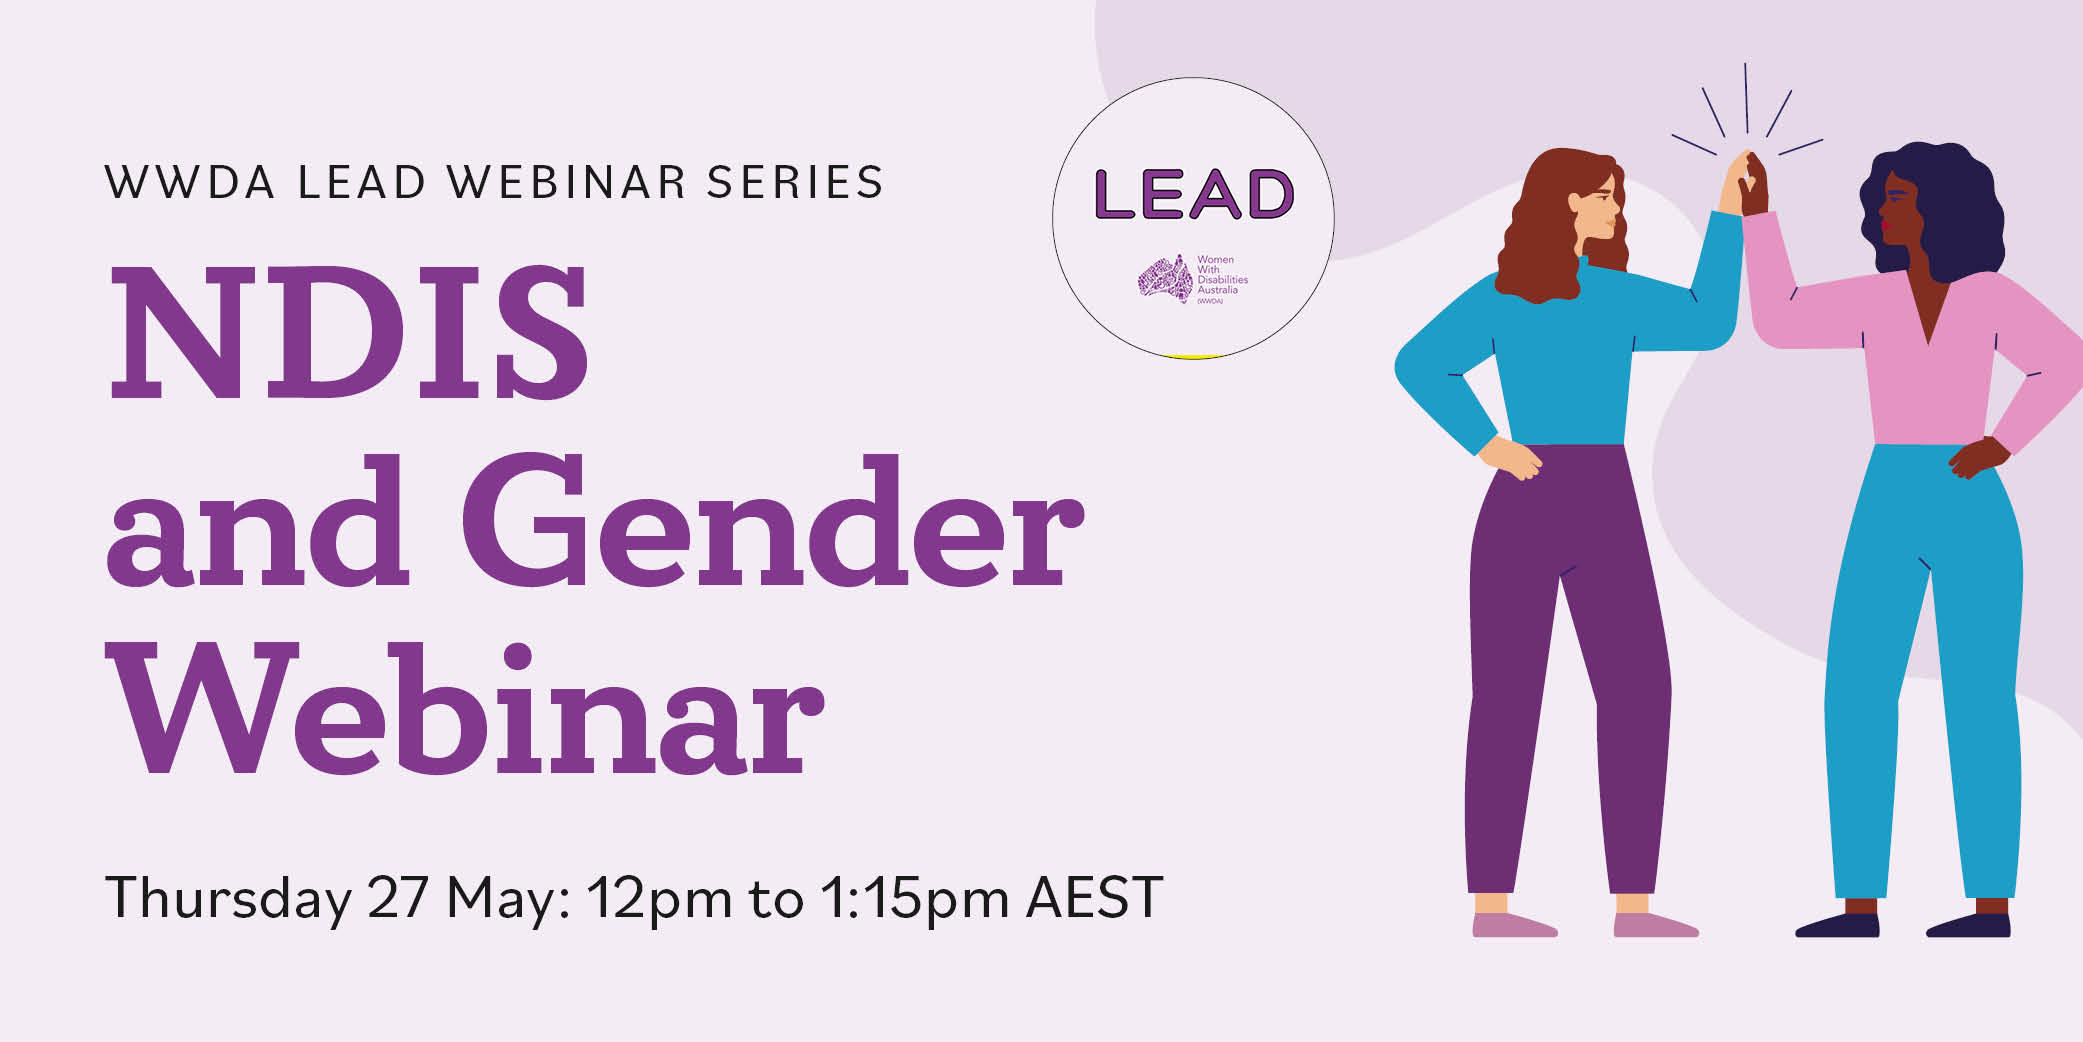 Light purple background, dark purple heading NDIS and Gender Webinar. Includes an illustration of two women giving each other a high 5.